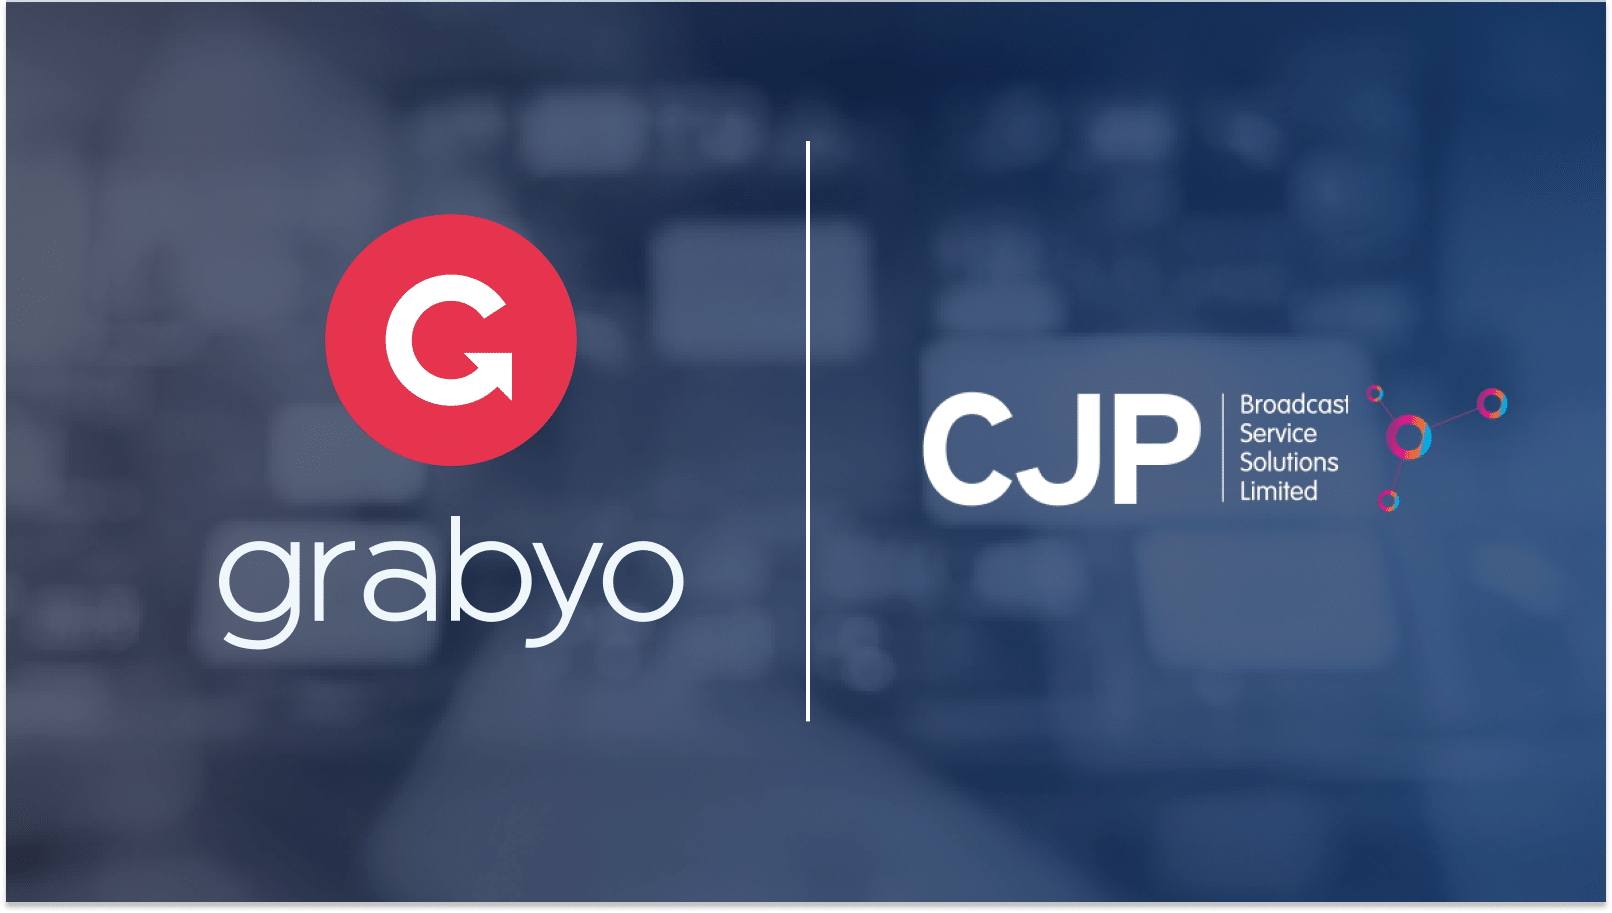 Live video production solutions: Grabyo teams up with CJP